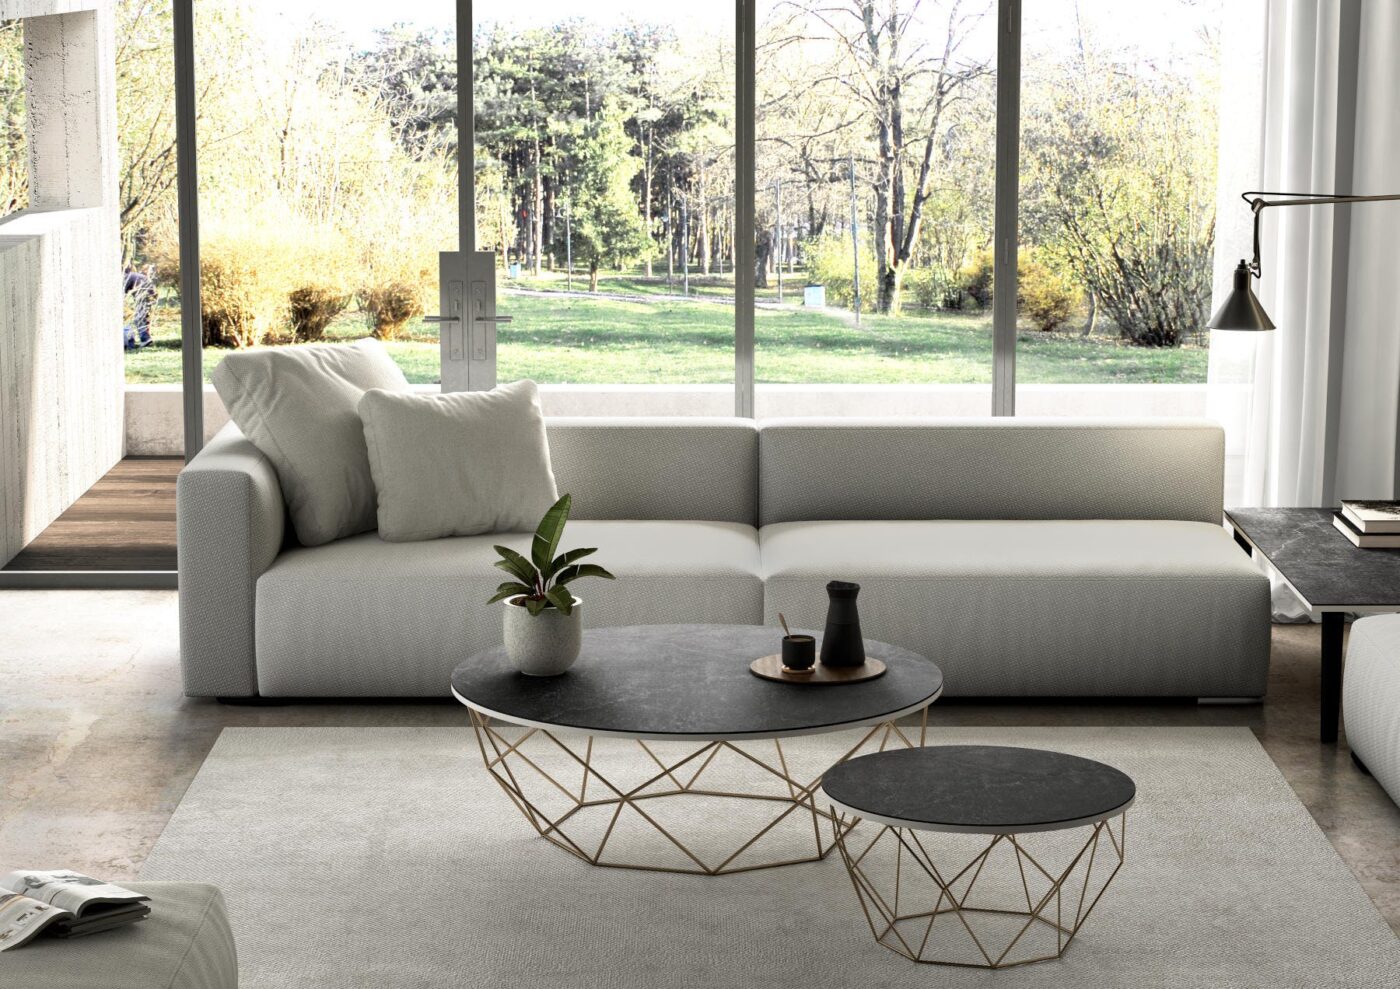 Image of Mesa Dekton Slim Table Detalle Laos 2 1 in Spring at home: let’s make the most of it! - Cosentino